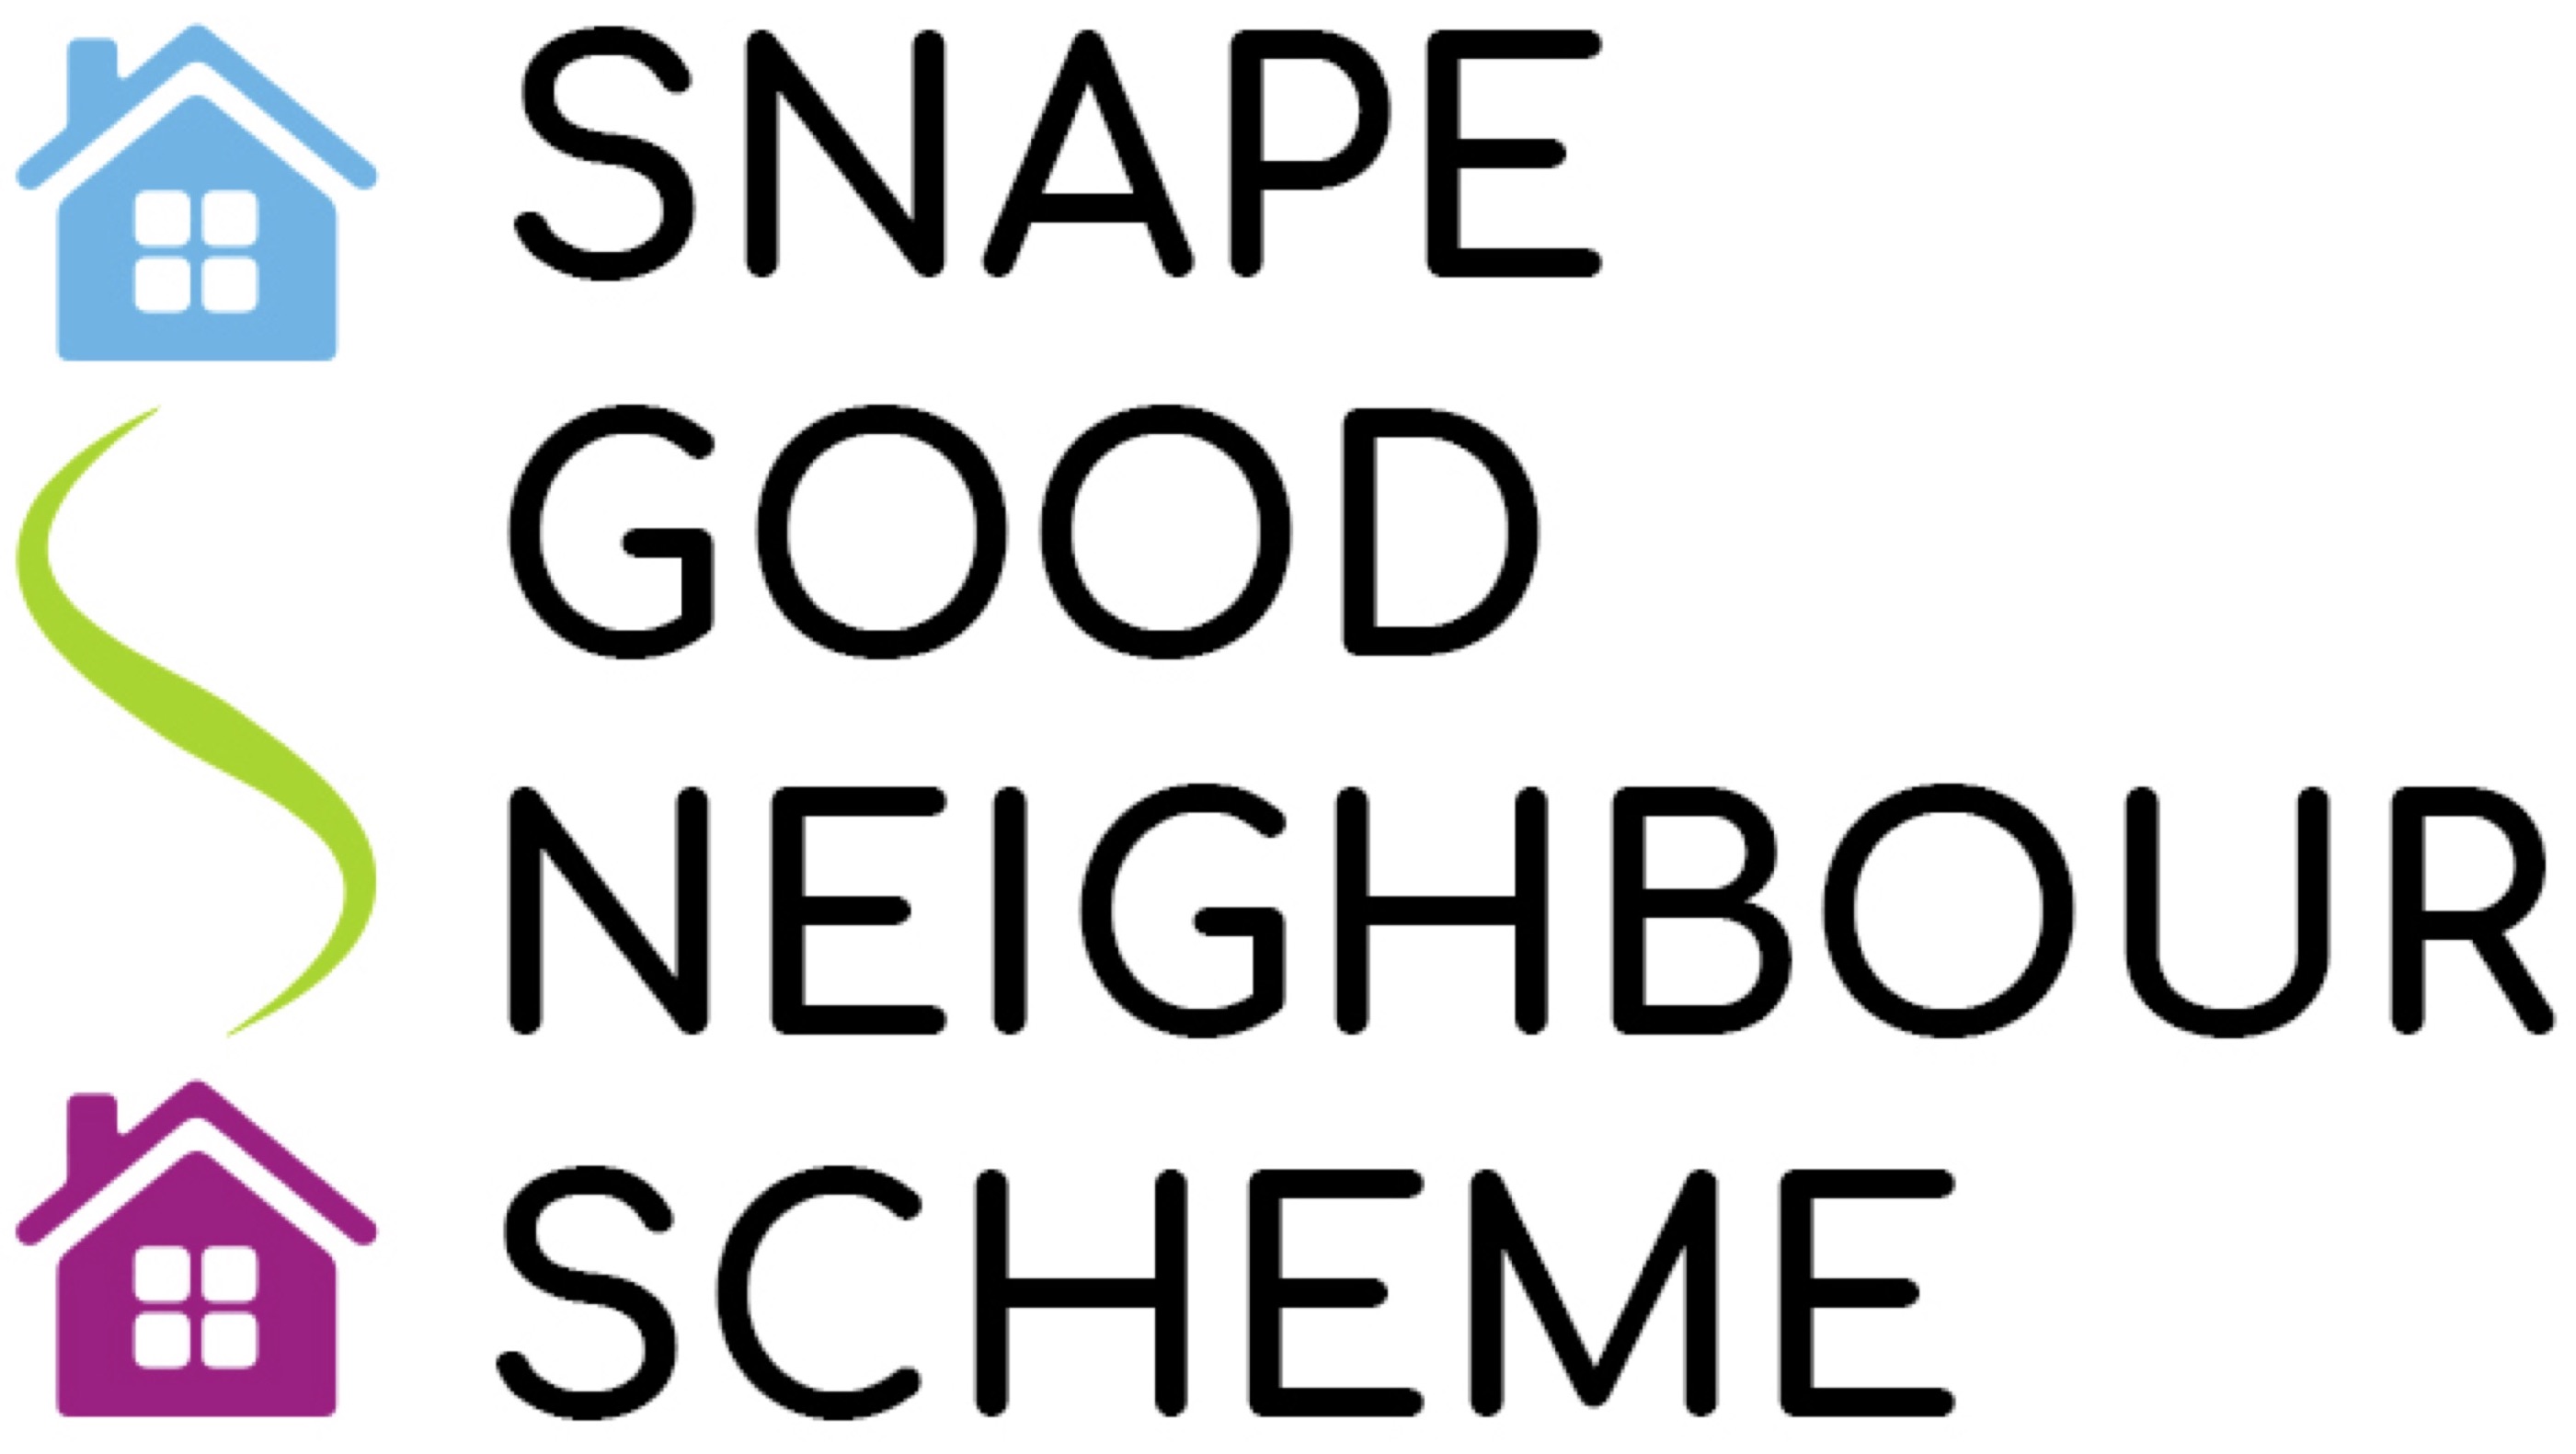 Snape Good Neighbour Scheme logo, which appears on Volunteers' passes